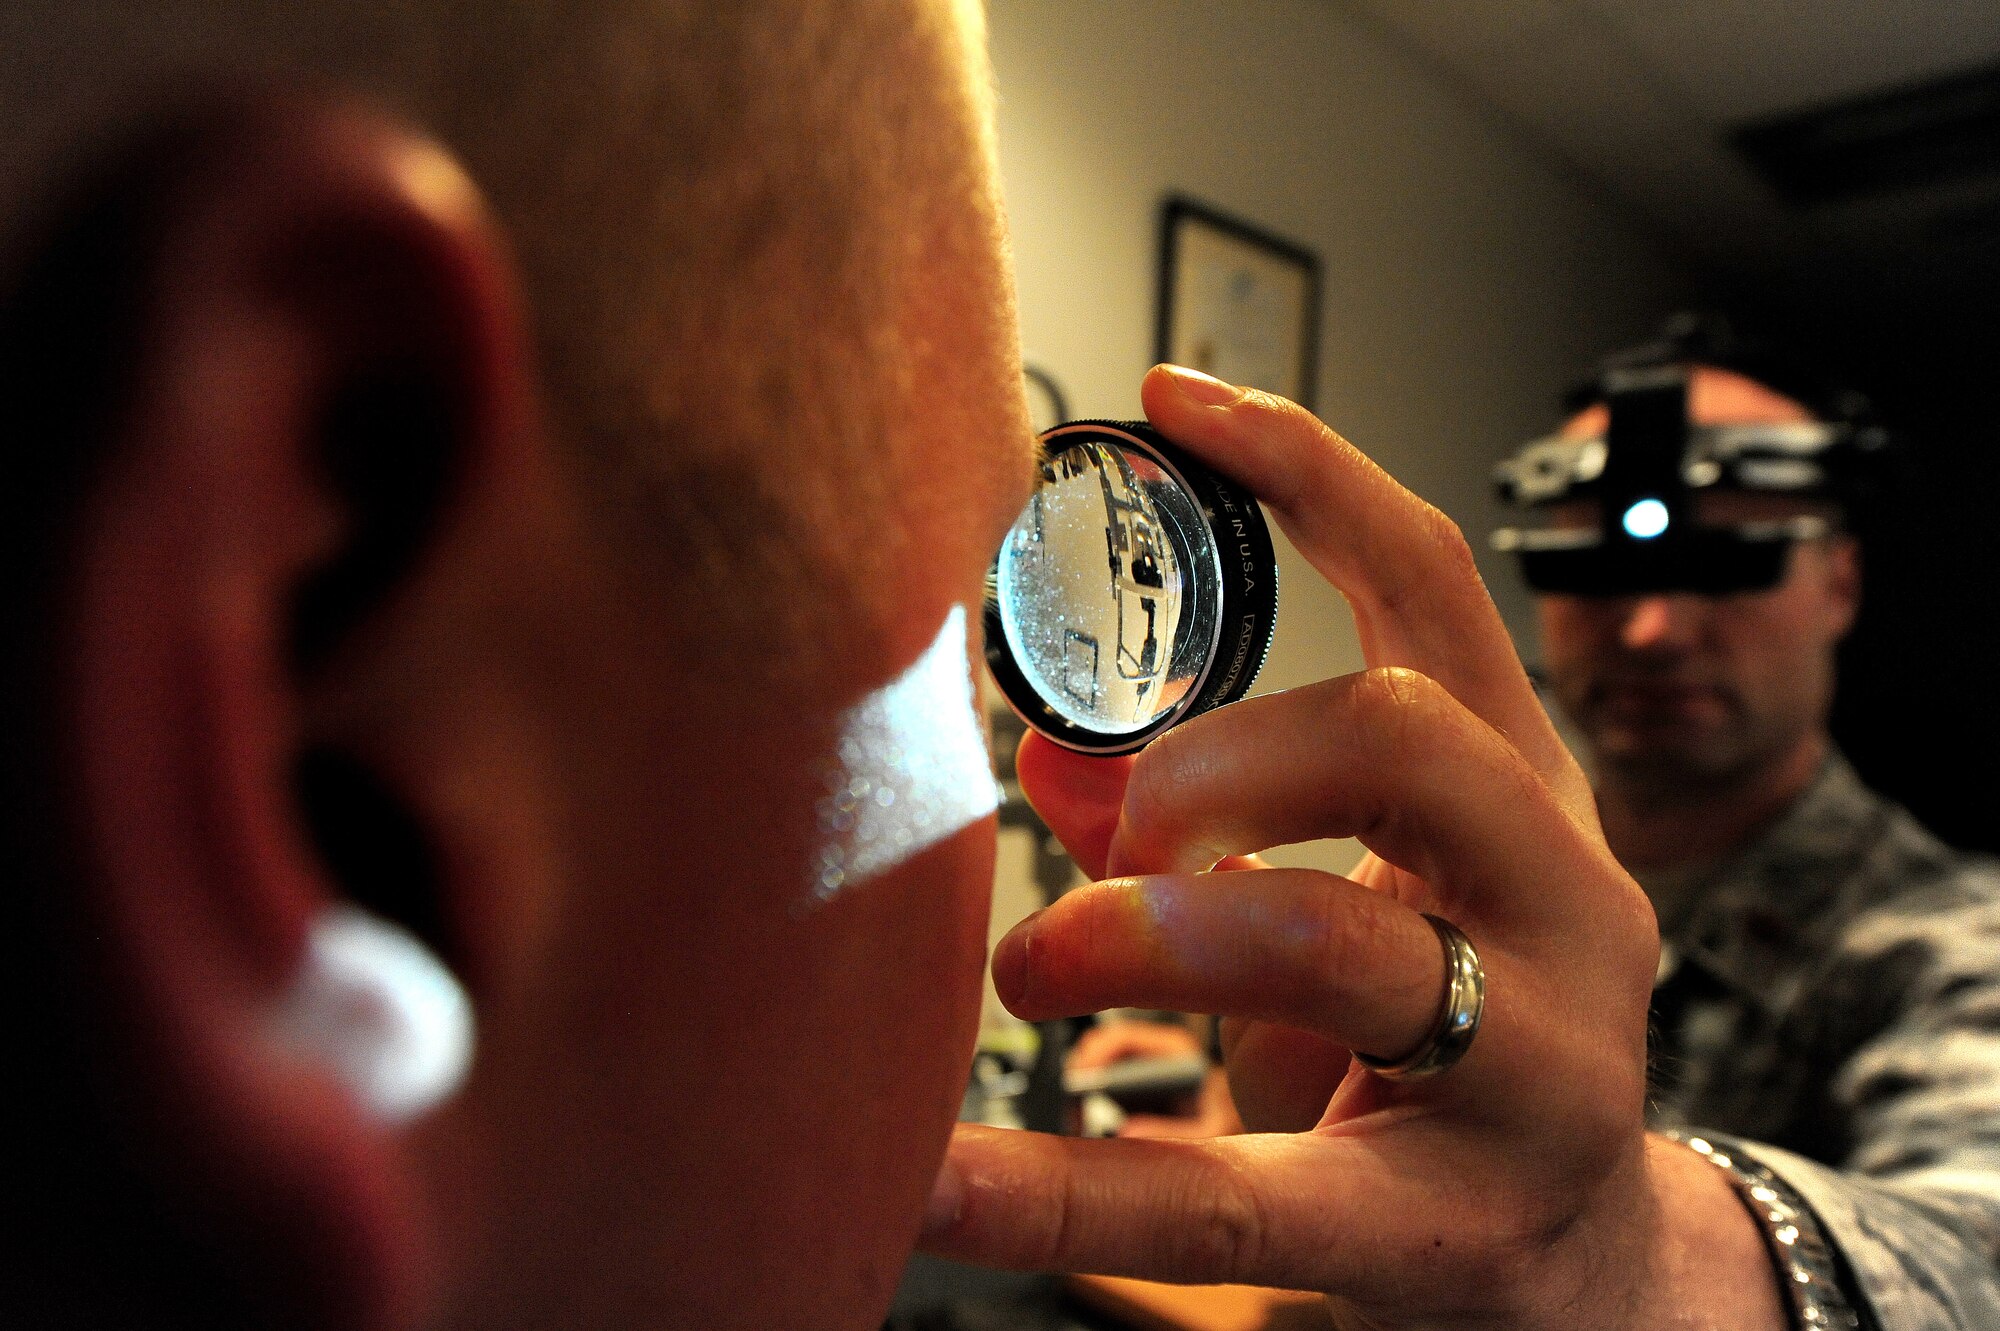 Dr. (Maj.) Michael Bogaard, 509th Medical Operations Squadron optometrist, uses a binocular indirect ophthalmoscope to perform an eye assessment on Senior Airman Jeffrey Afemon, 509th MDOS public health technician, in the optometry clinic at Whiteman Air Force Base, Mo., Sept. 4, 2013. The ophthalmoscope helps focus the light inside the patient’s eye and provides an image that the doctor uses to judge the health of the retina. (U.S. Air Force photo by Staff Sgt. Nick Wilson/Released)